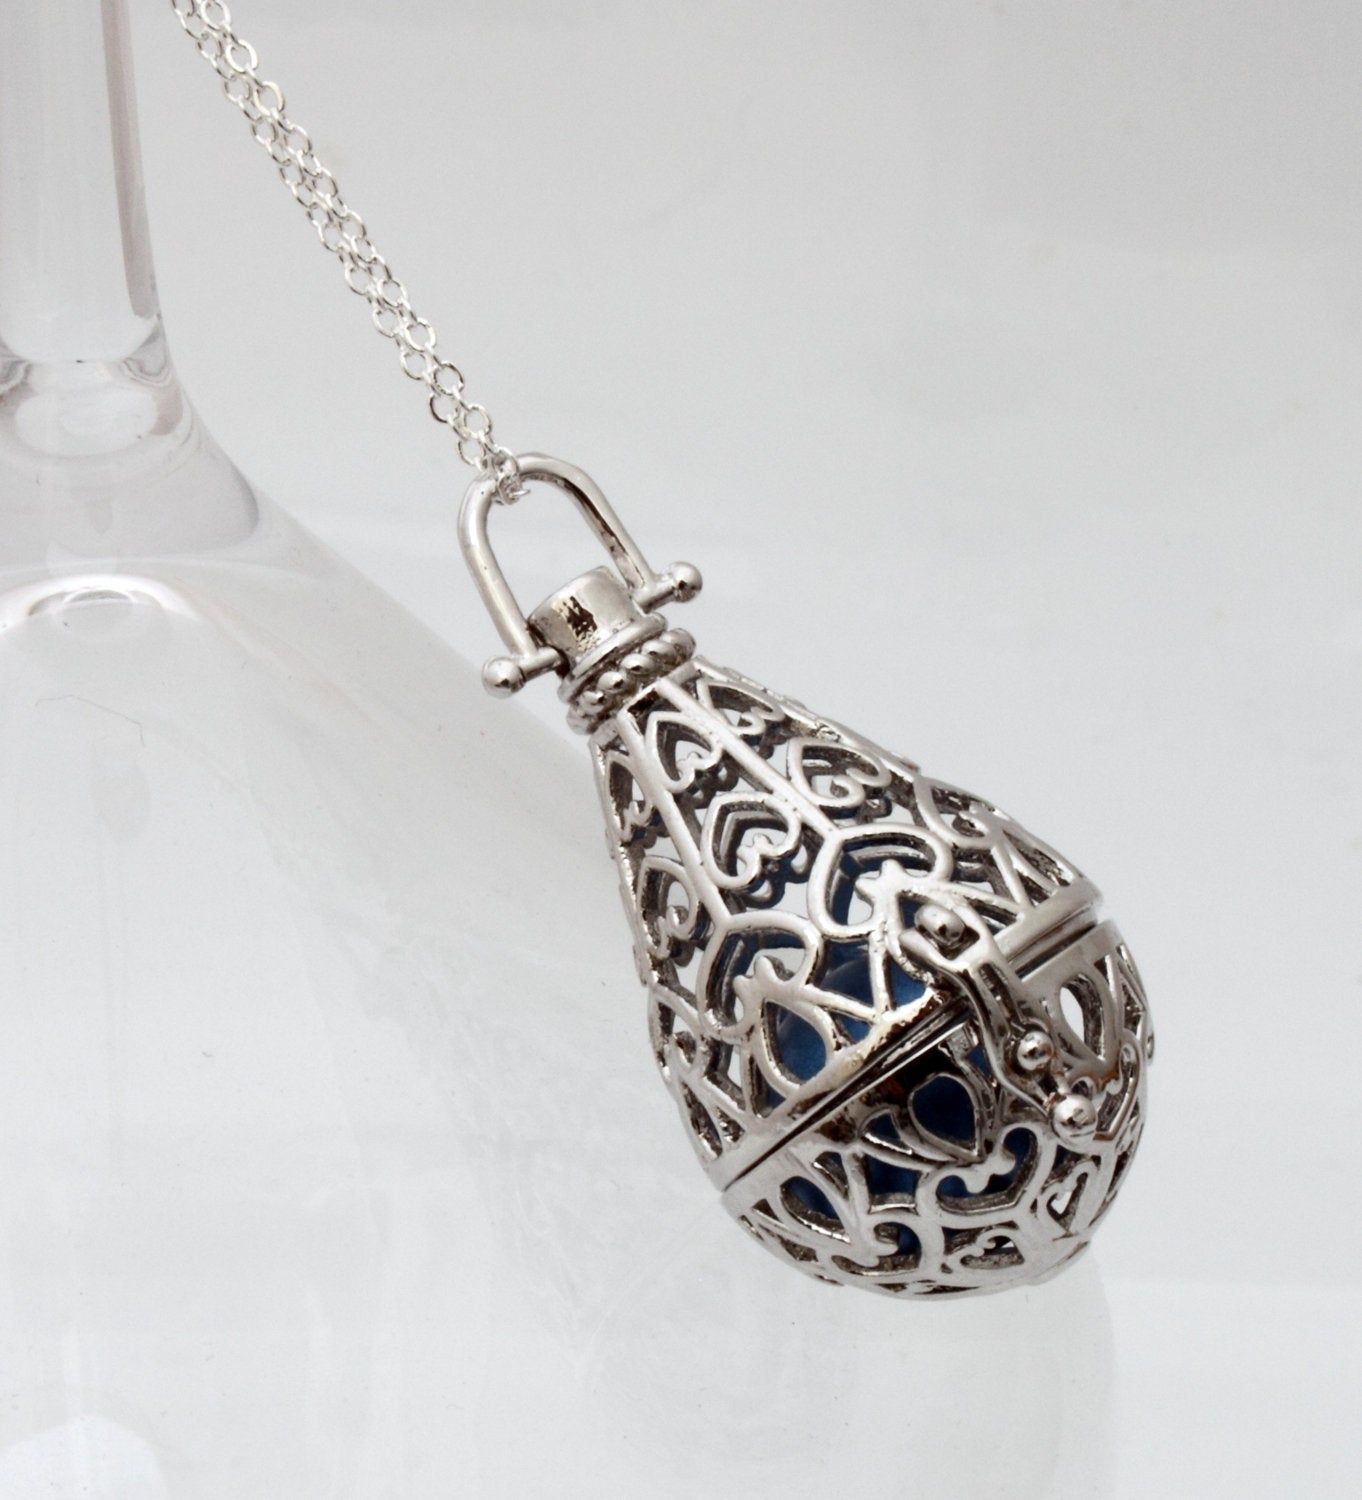 Angel Caller Filigree Heart Teardrop Locket With Choice Of Coloured Chime  Ball  Harmony Bell  Pregnancy Necklace  Mexican Bola  Silver Plate With Regard To Best And Newest Chiming Filigree Hearts Pendant Necklaces (View 5 of 25)